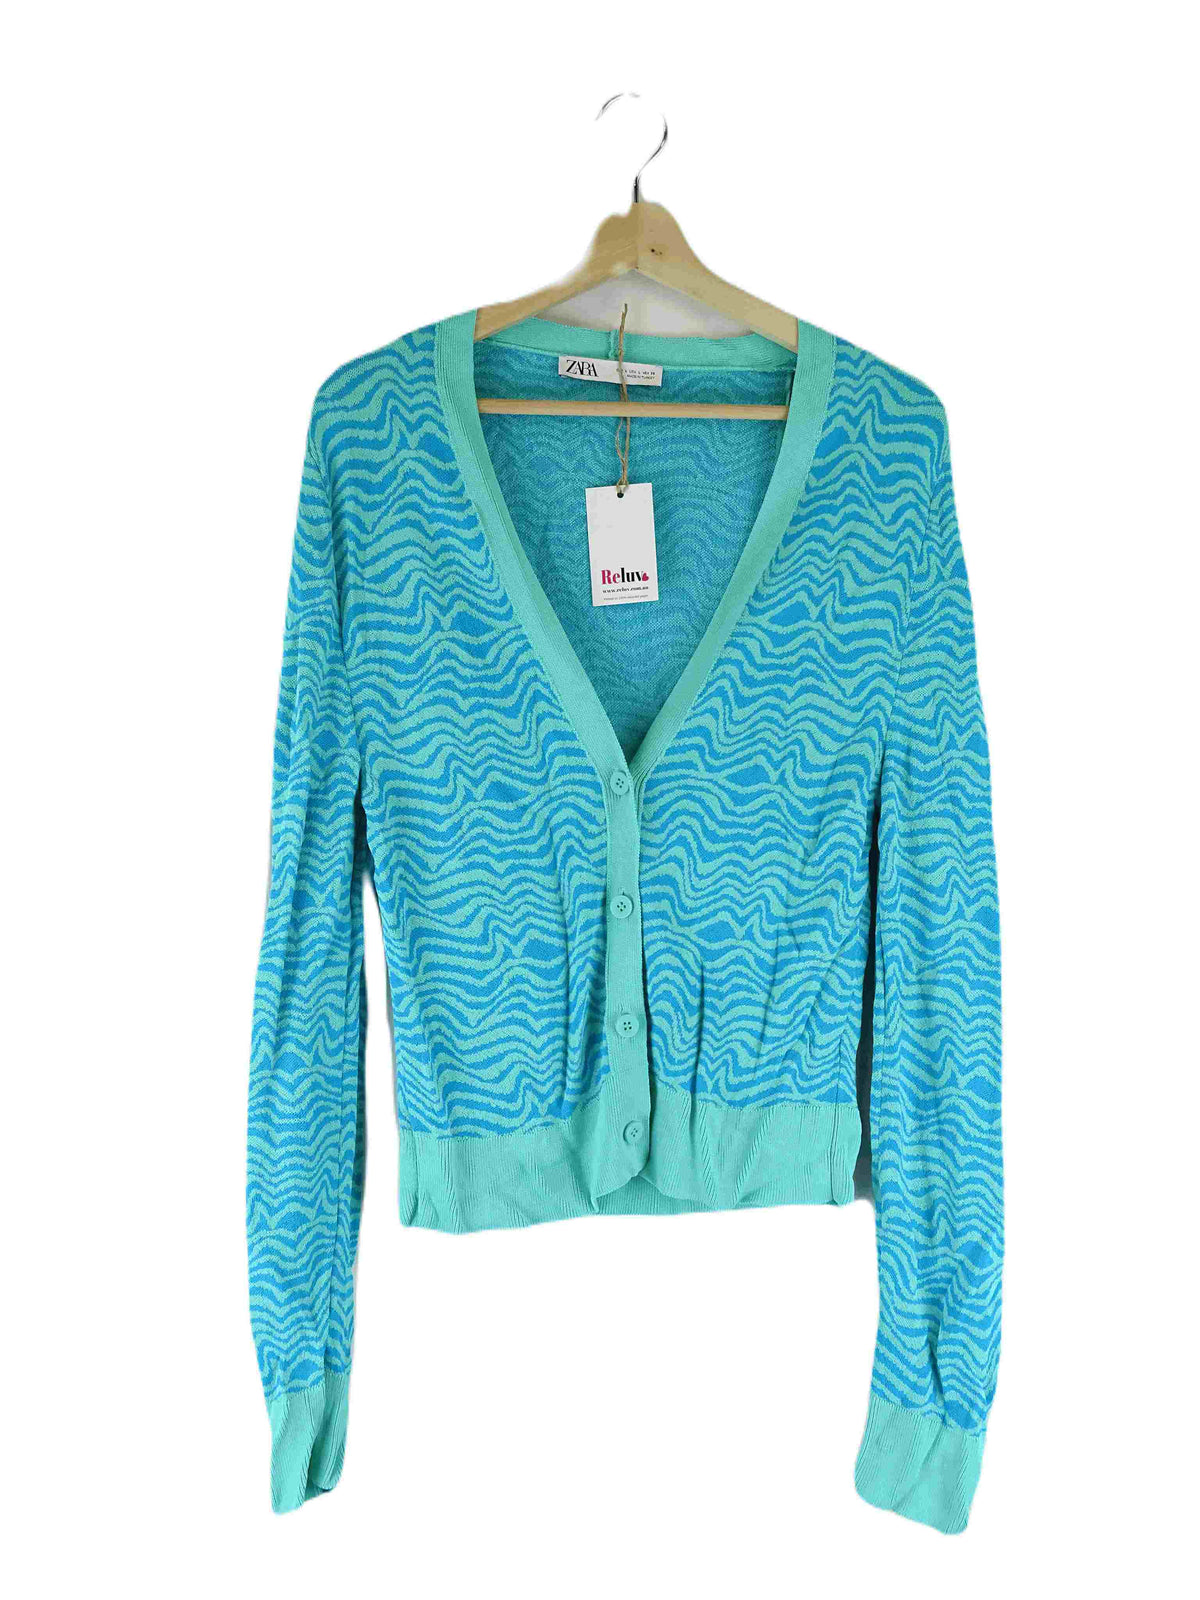 Zara Blue and Green Patterned Knit Cardigan L